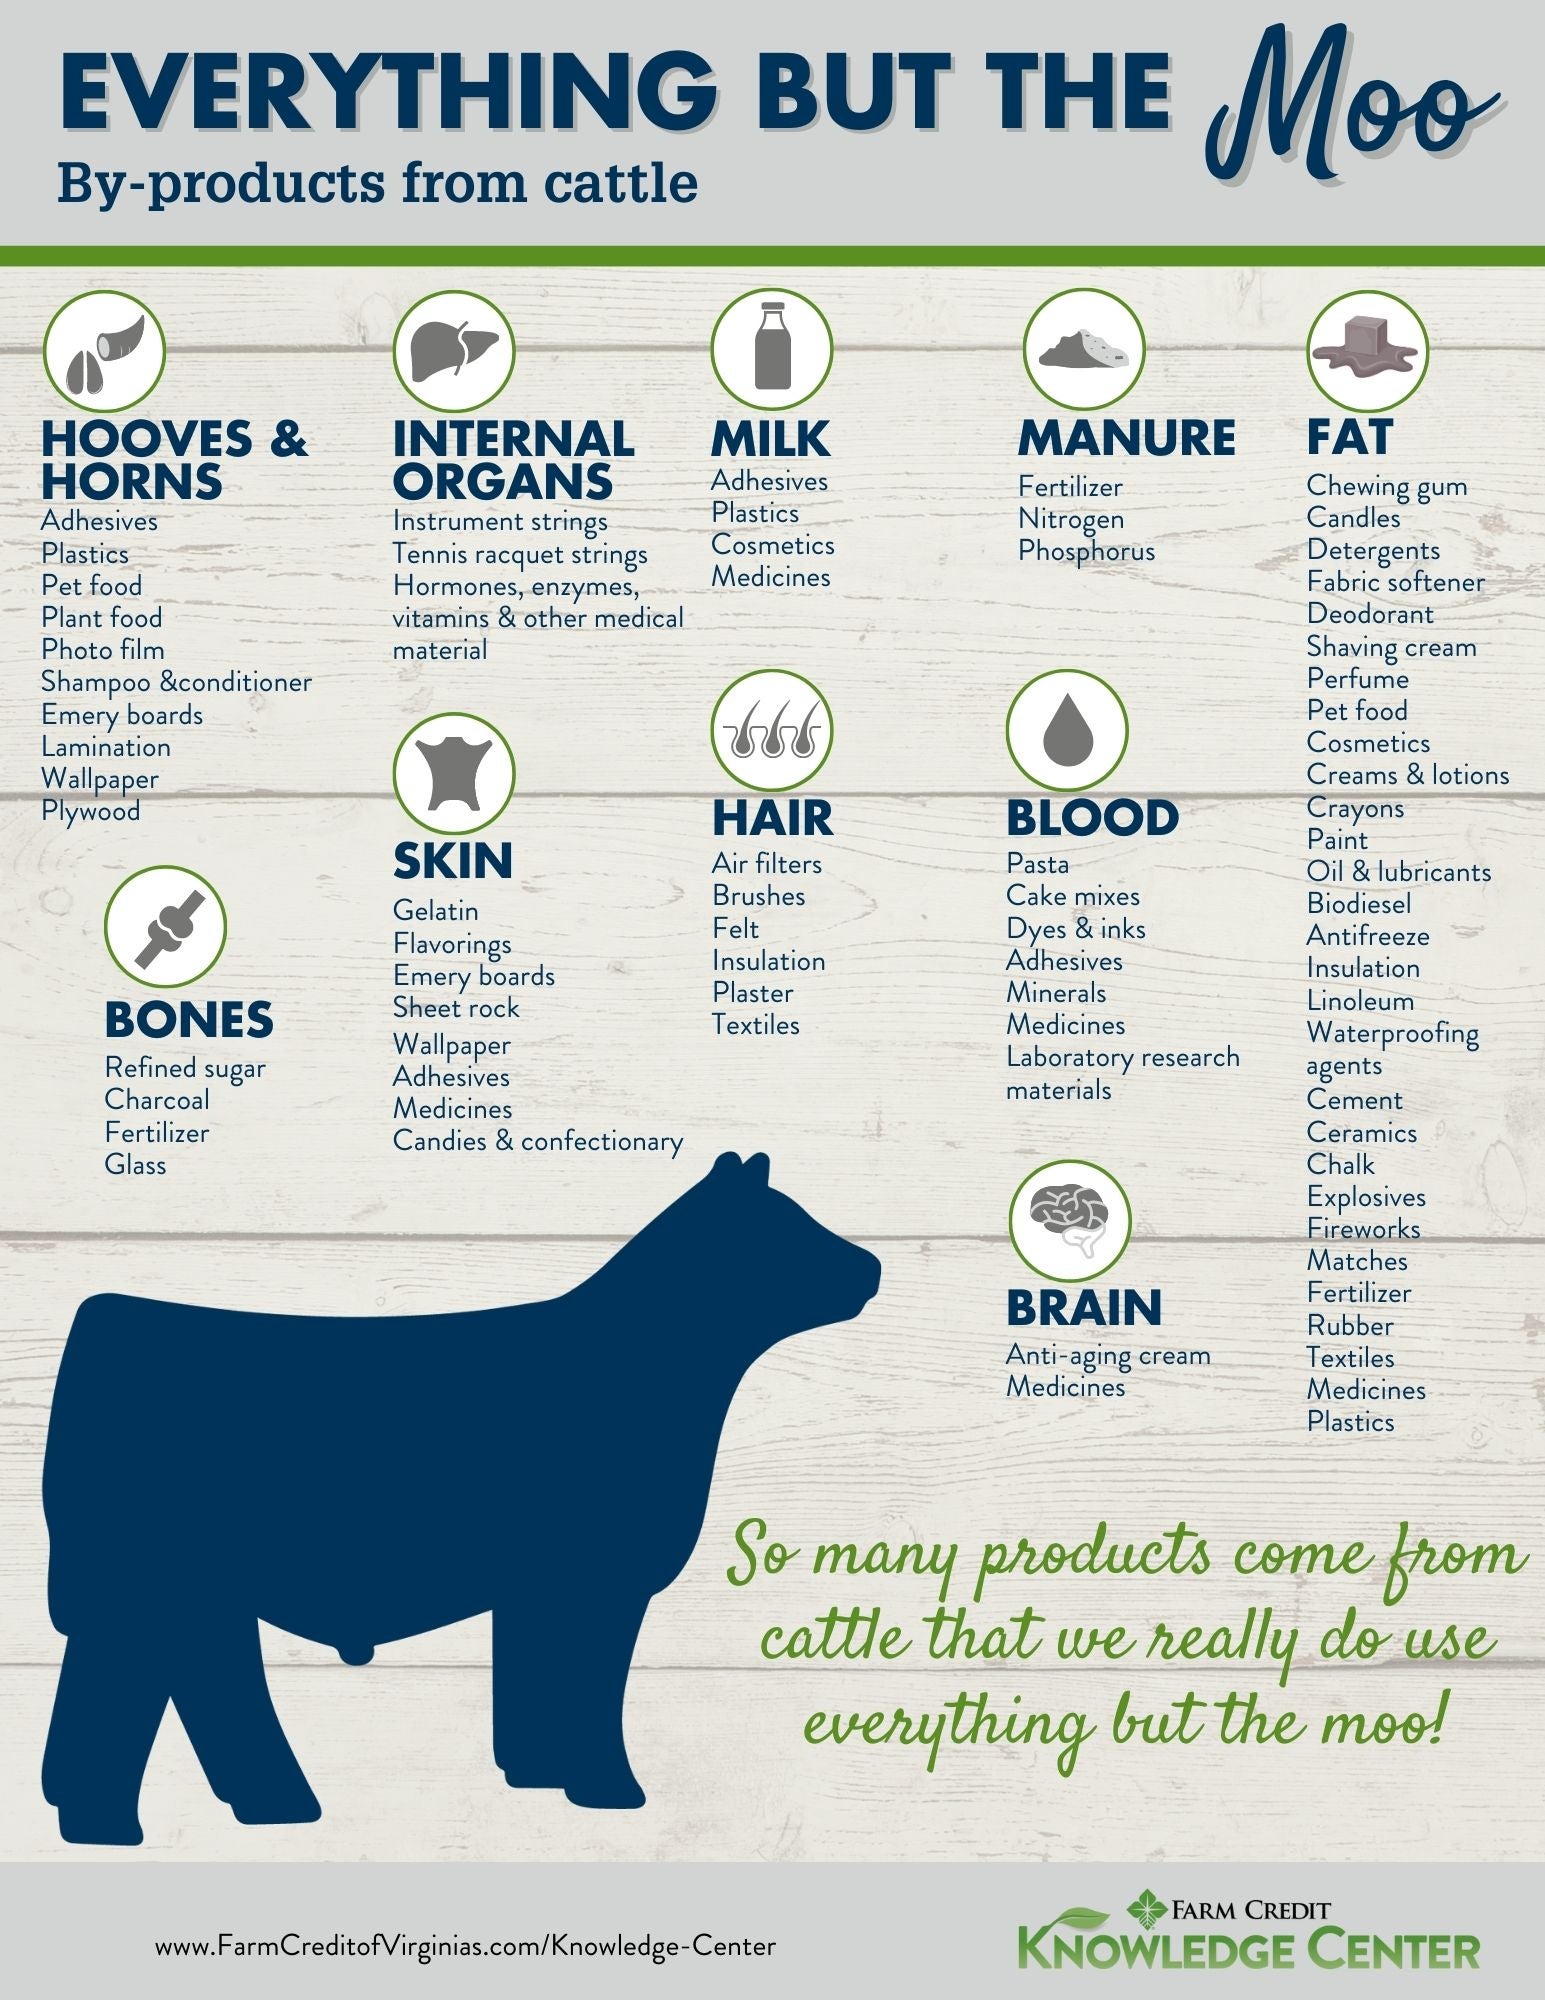 everything but the moo by-products from cattle